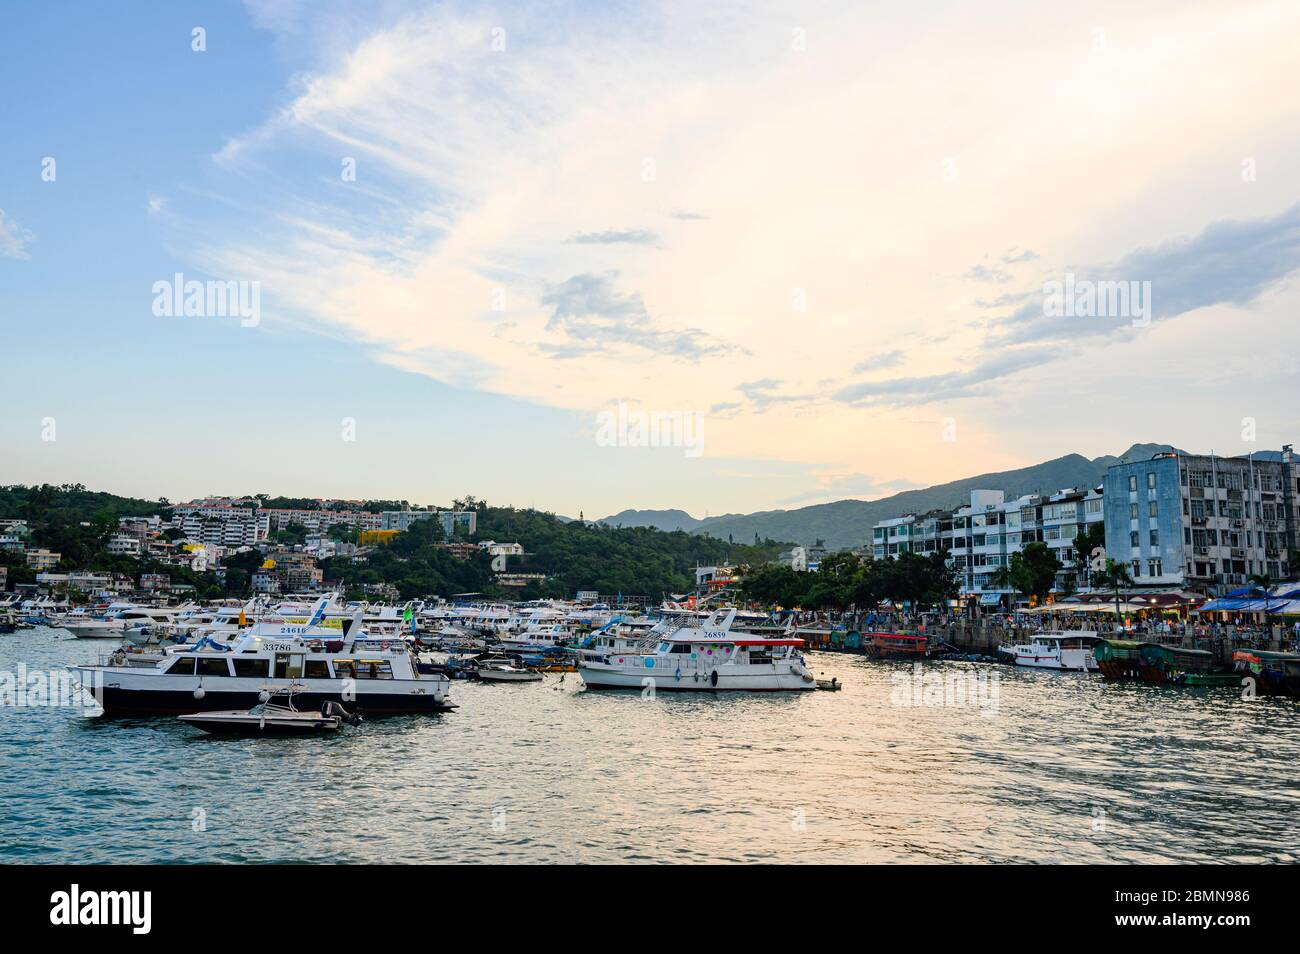 The sunset view of the pier at Sai Kung, Hong Kong with many yachts and boats parking around. Stock Photo